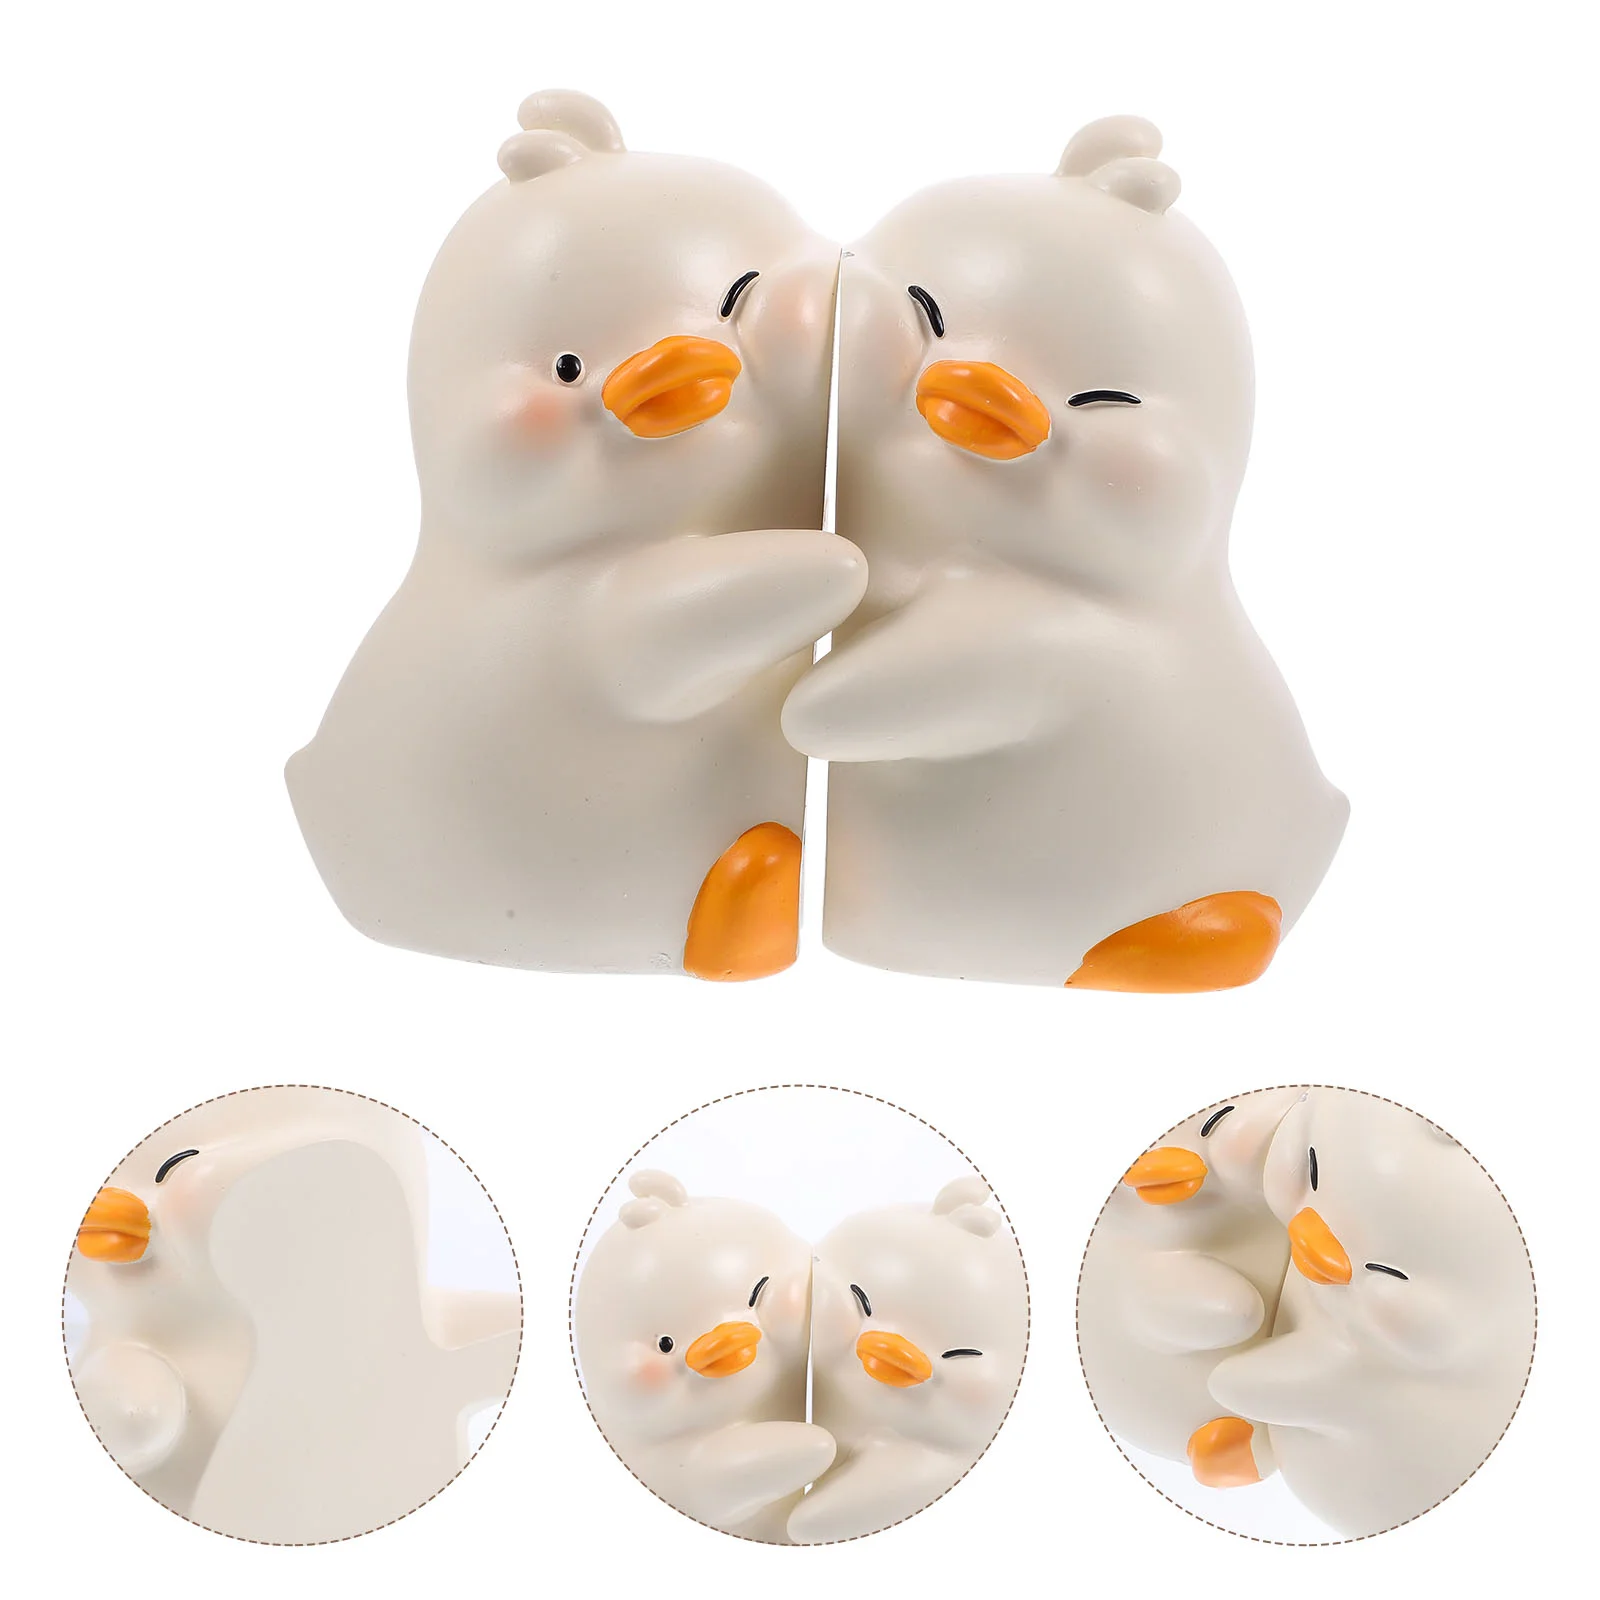 1 Pair Cute Hug Ducks Decorative Bookend Resin Book Holder Stopper for Home Office Desk cute kitchen sink filter plastic pool bathtub drain strainer hair catcher stopper waste sink filter kitchen tools accessories